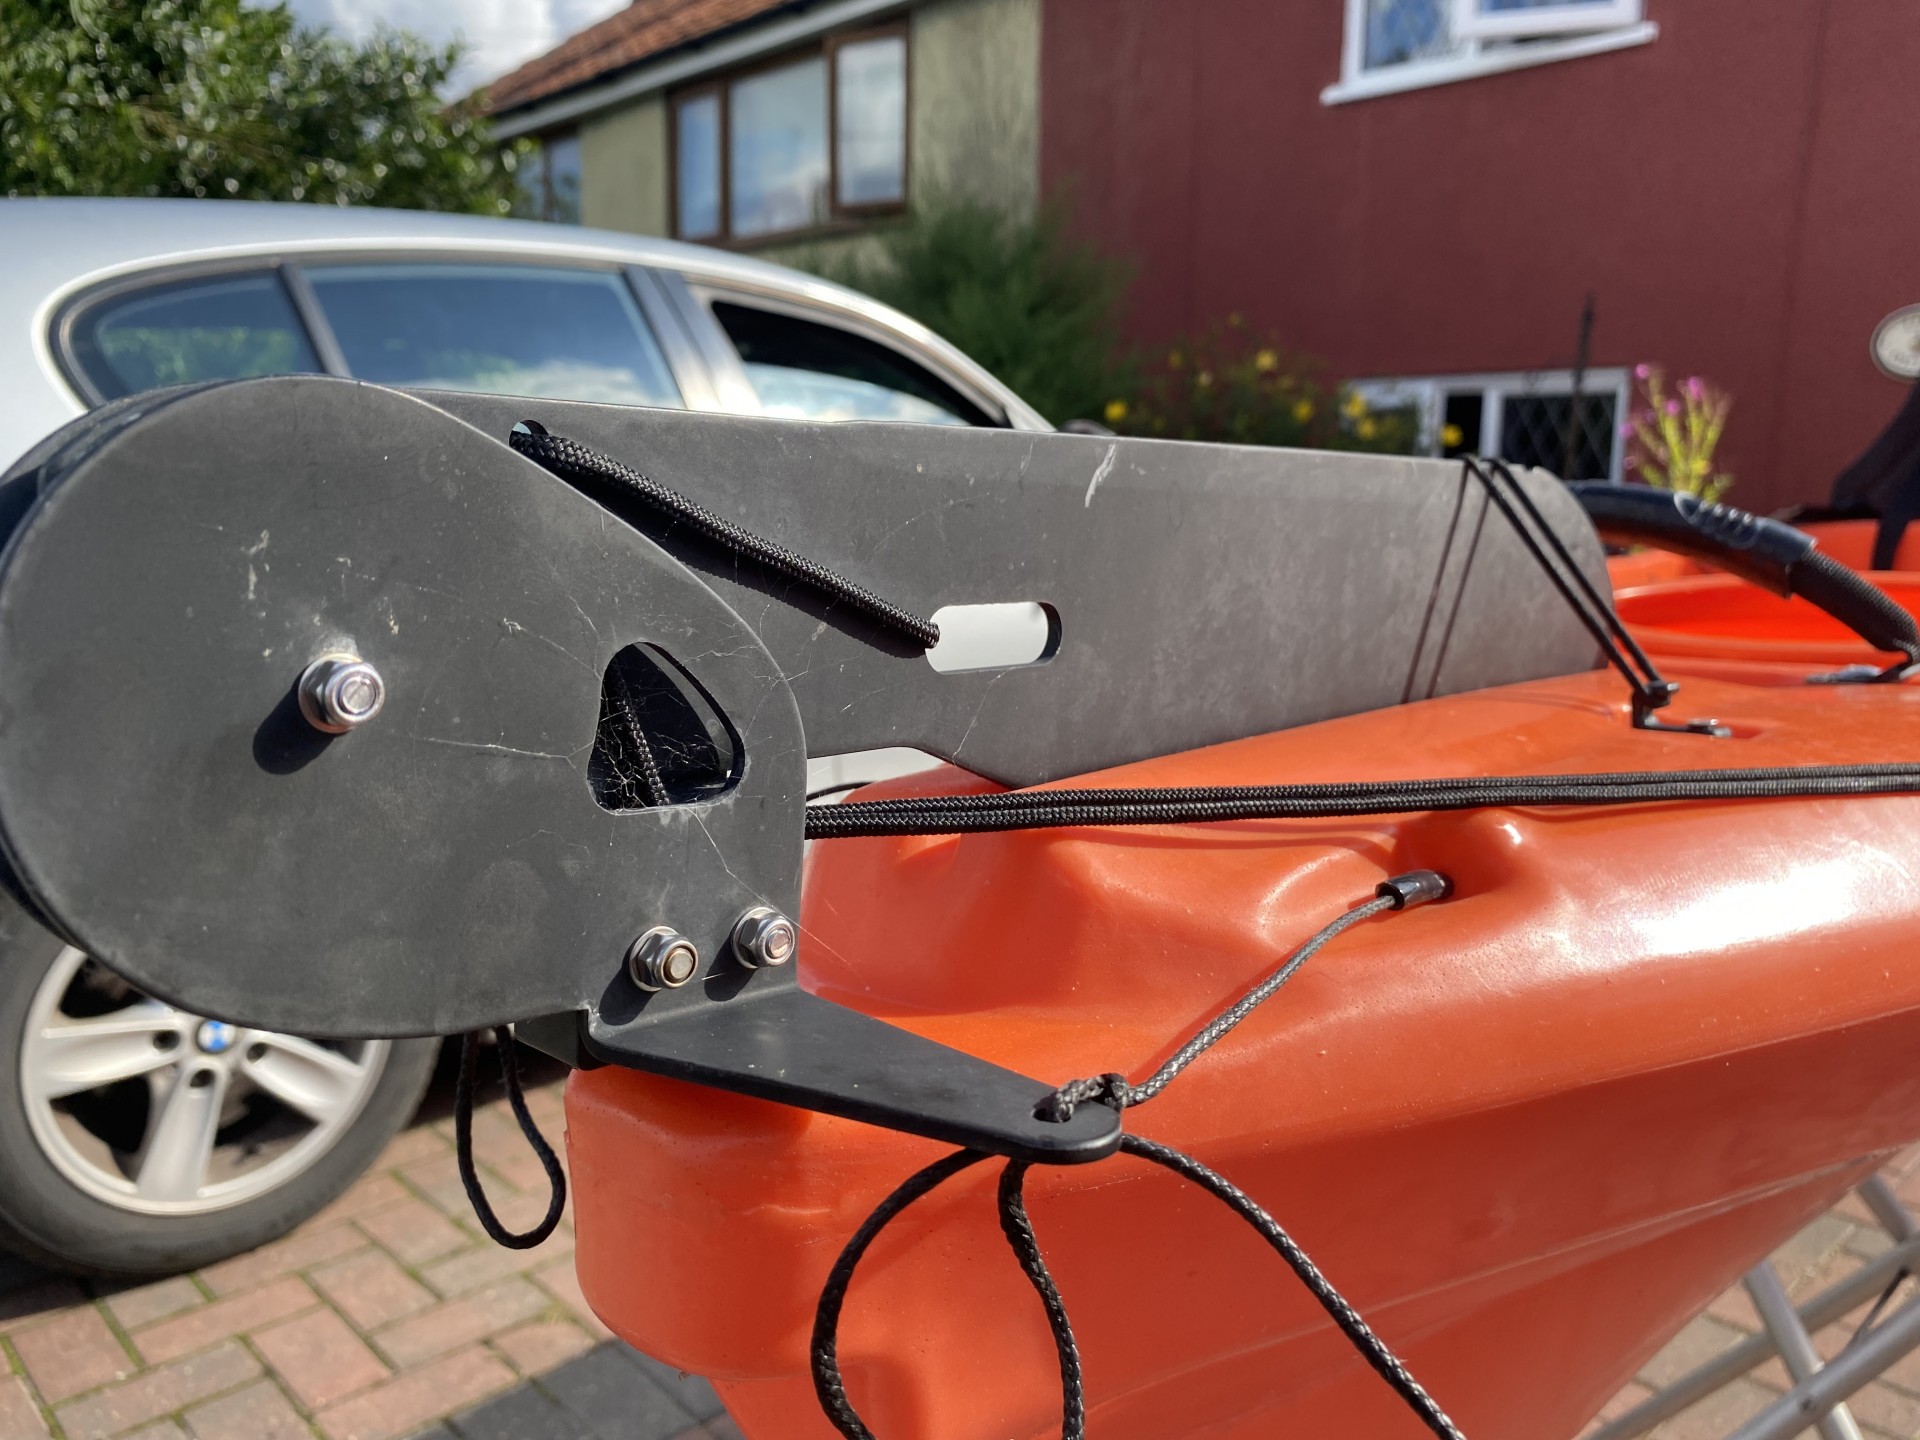 Sit-on-top kayak rudder showing cable join